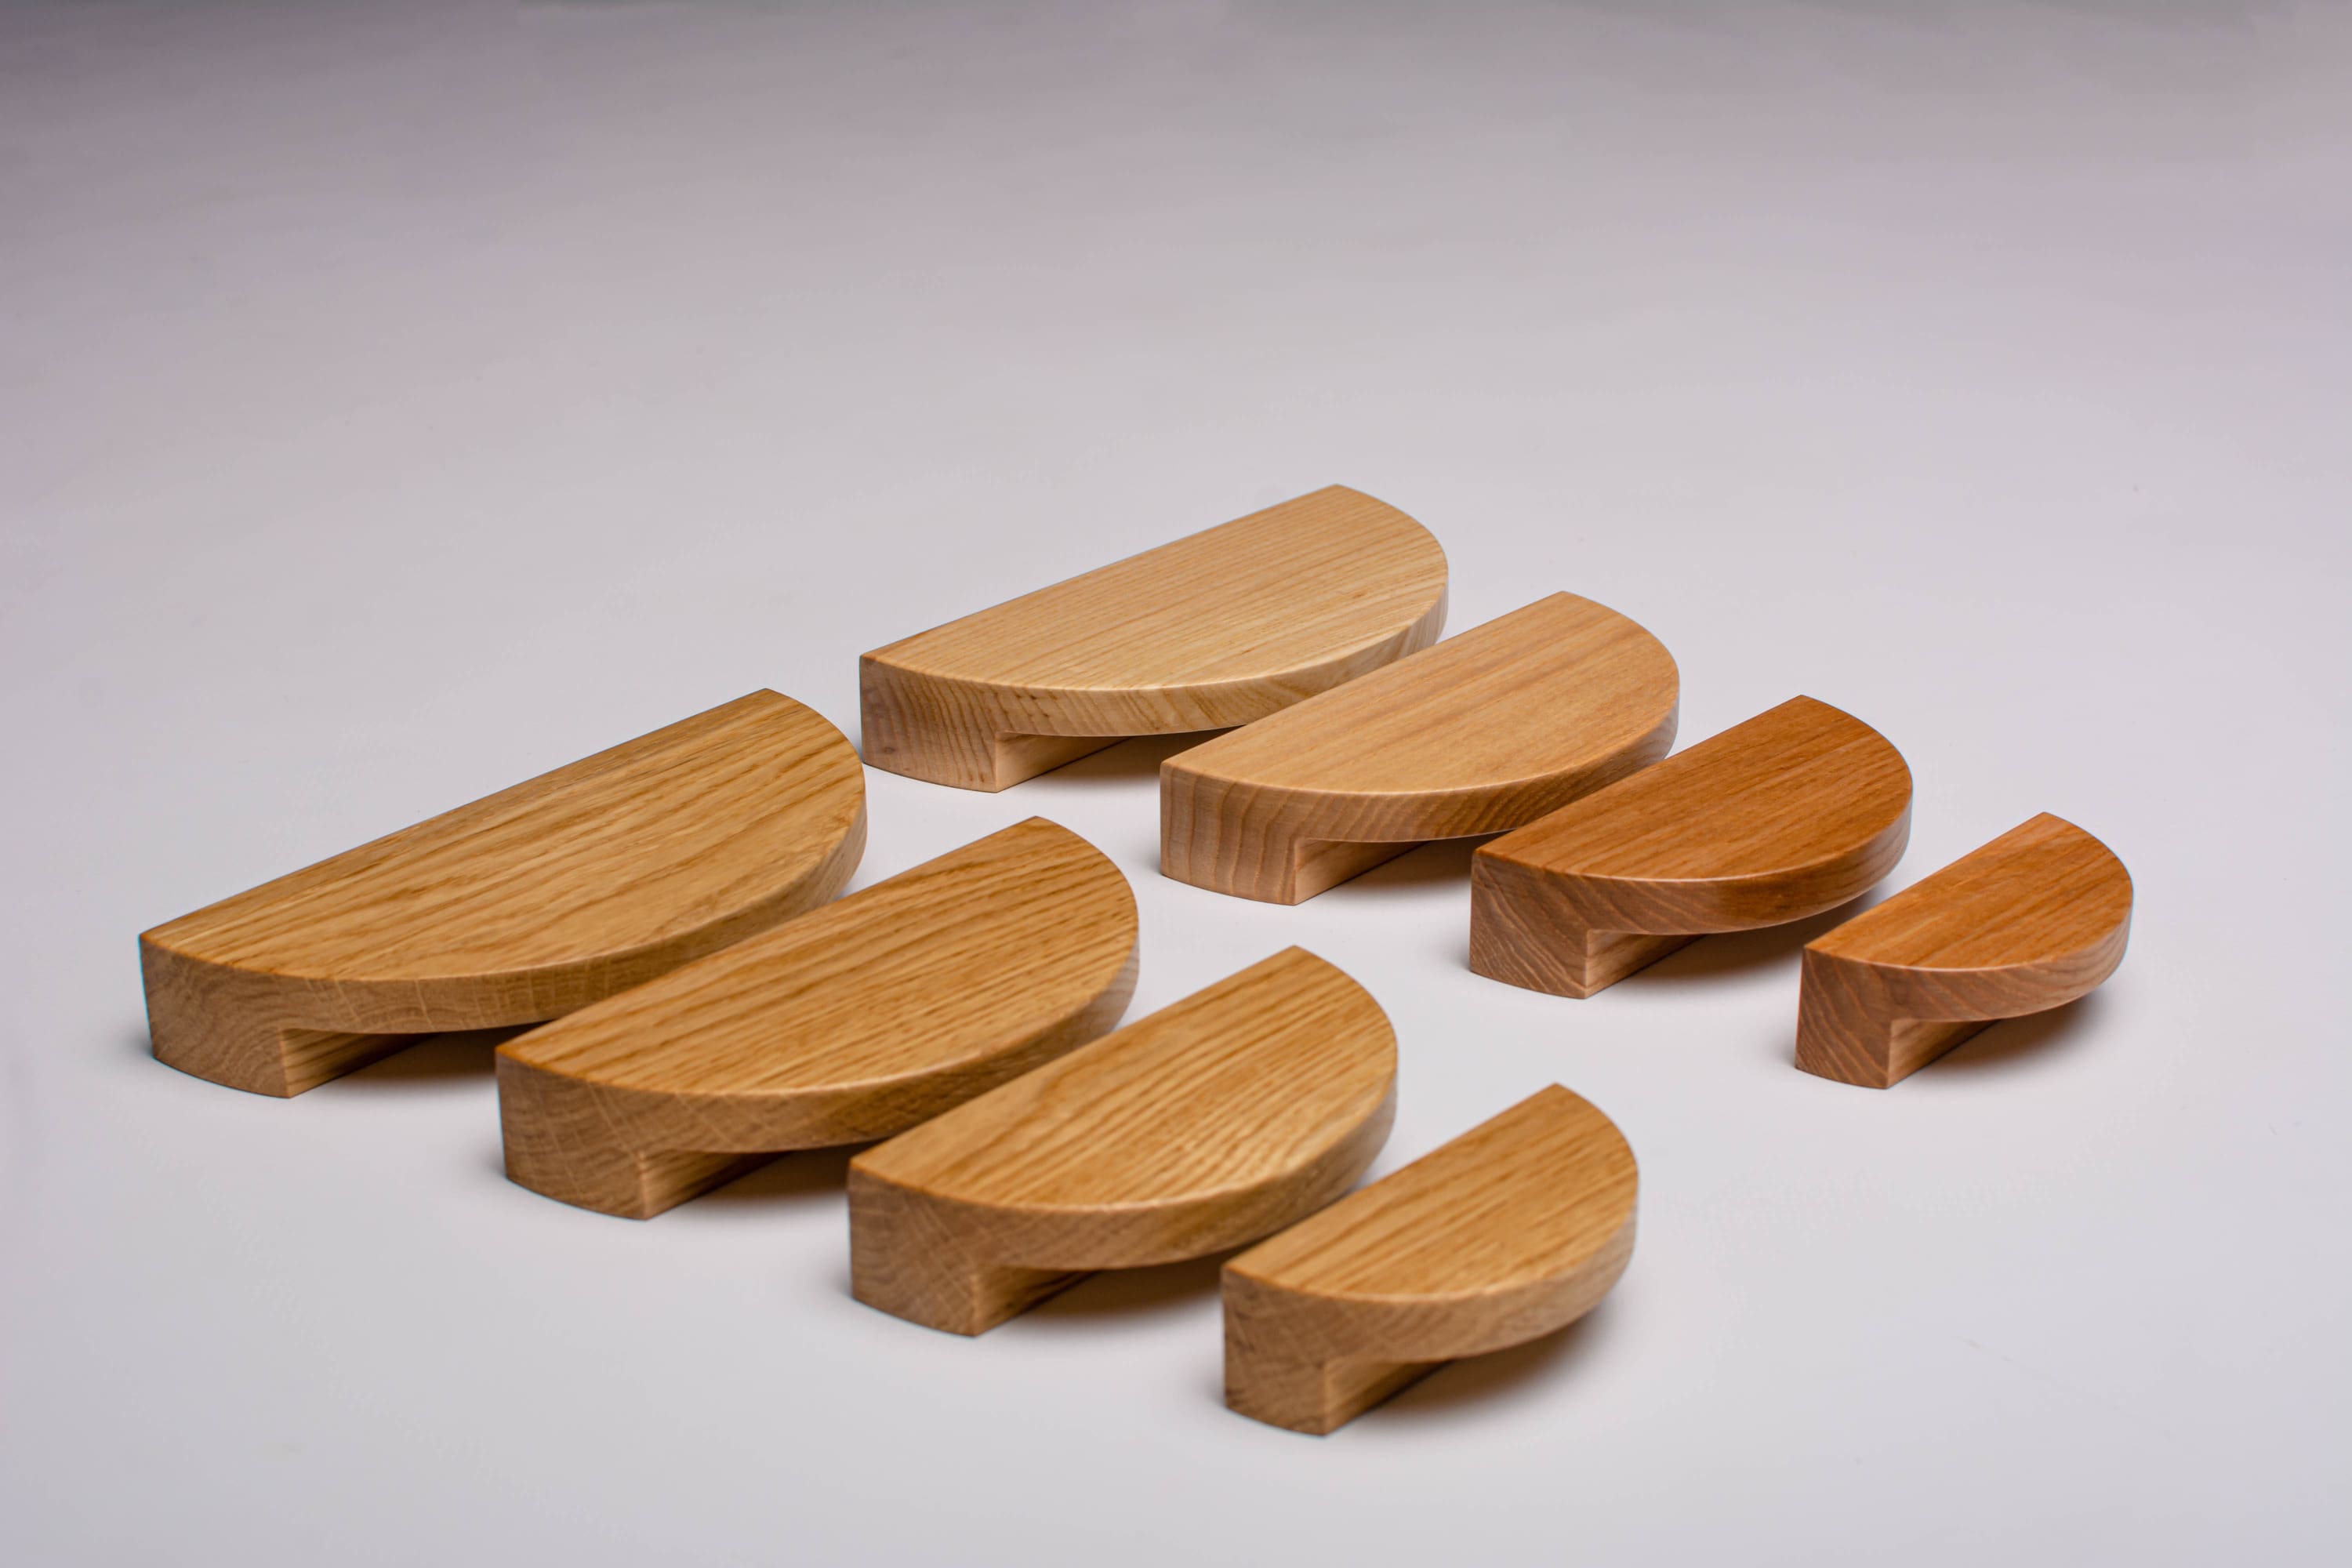 Oak and Ash wooden Cabinet Handles in different sizes. From Large to small 